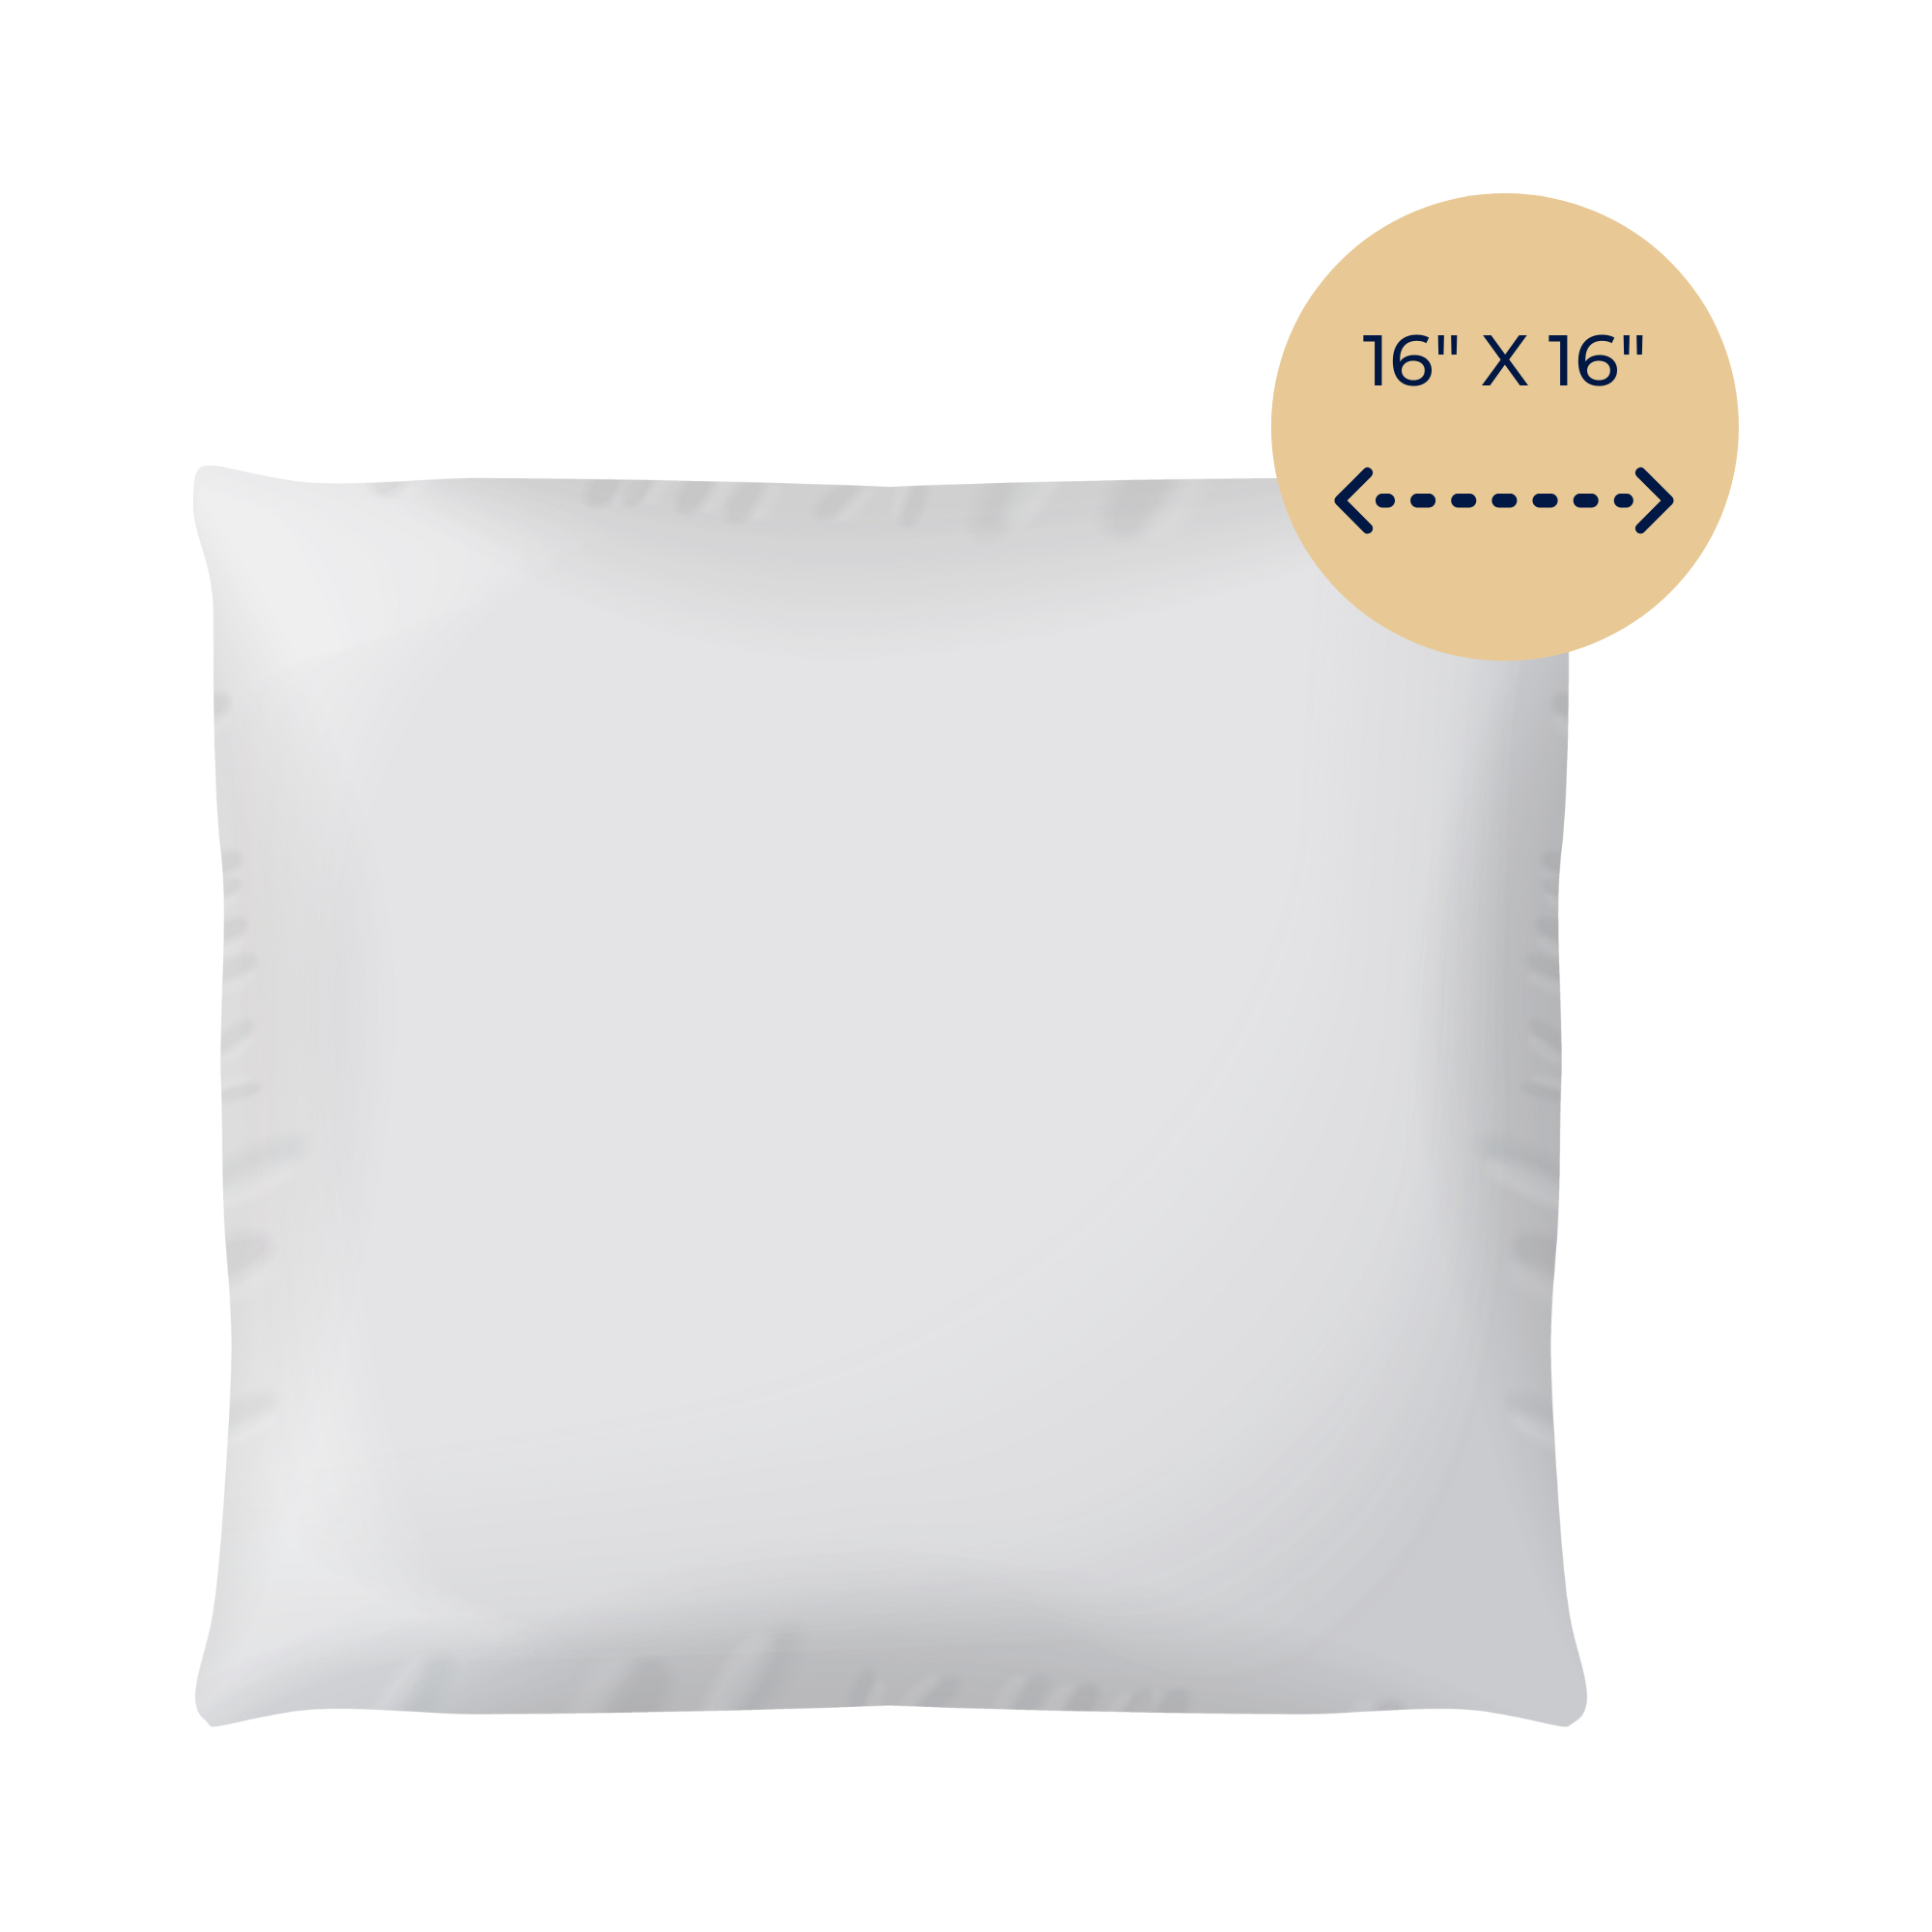 Oubonun 20 x 20 Throw Pillow Inserts (Set of 2) with 100% Cotton Cover - 20  Inch Square Interior Decorative Sofa Pillow Insert Pair - White Couch